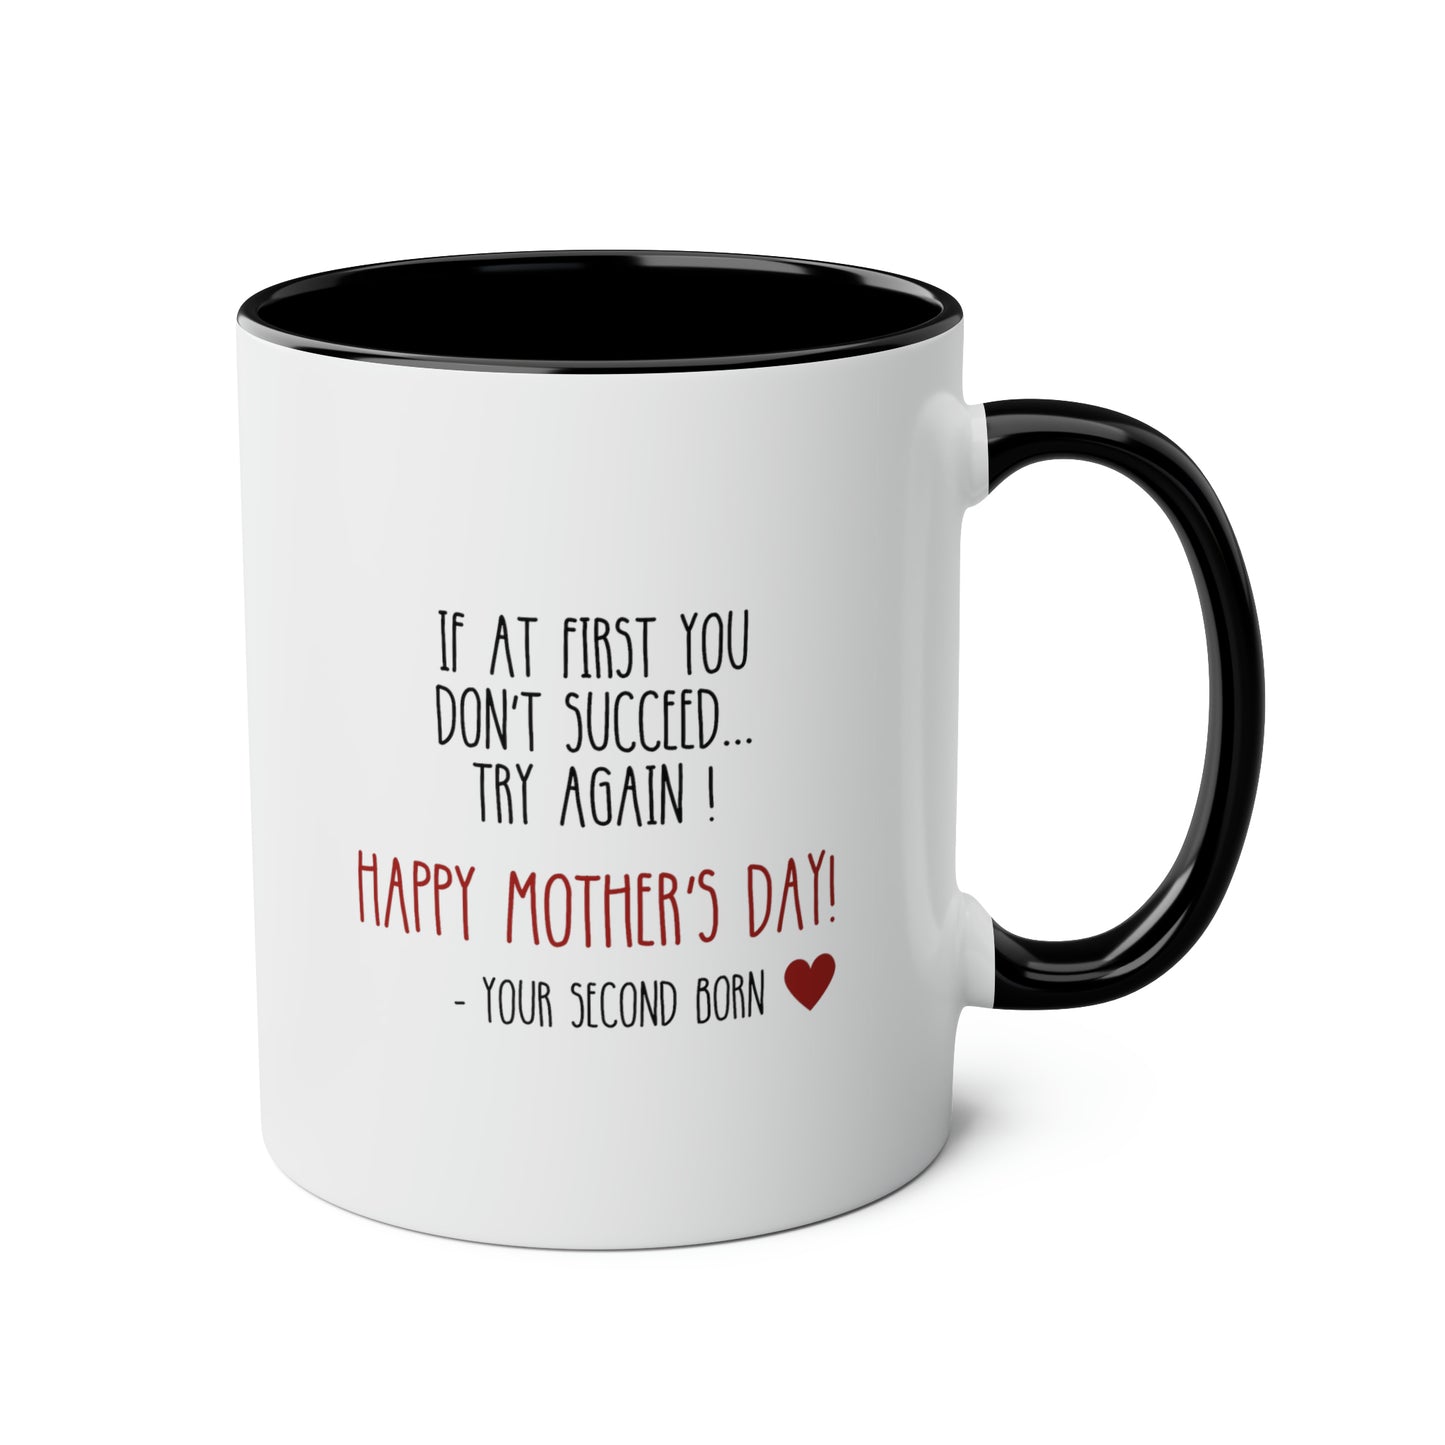 If At First You Don't Succeed Try Again 11oz white with black accent funny large coffee mug gift for mother's day second born child sibling mom her waveywares wavey wares wavywares wavy wares